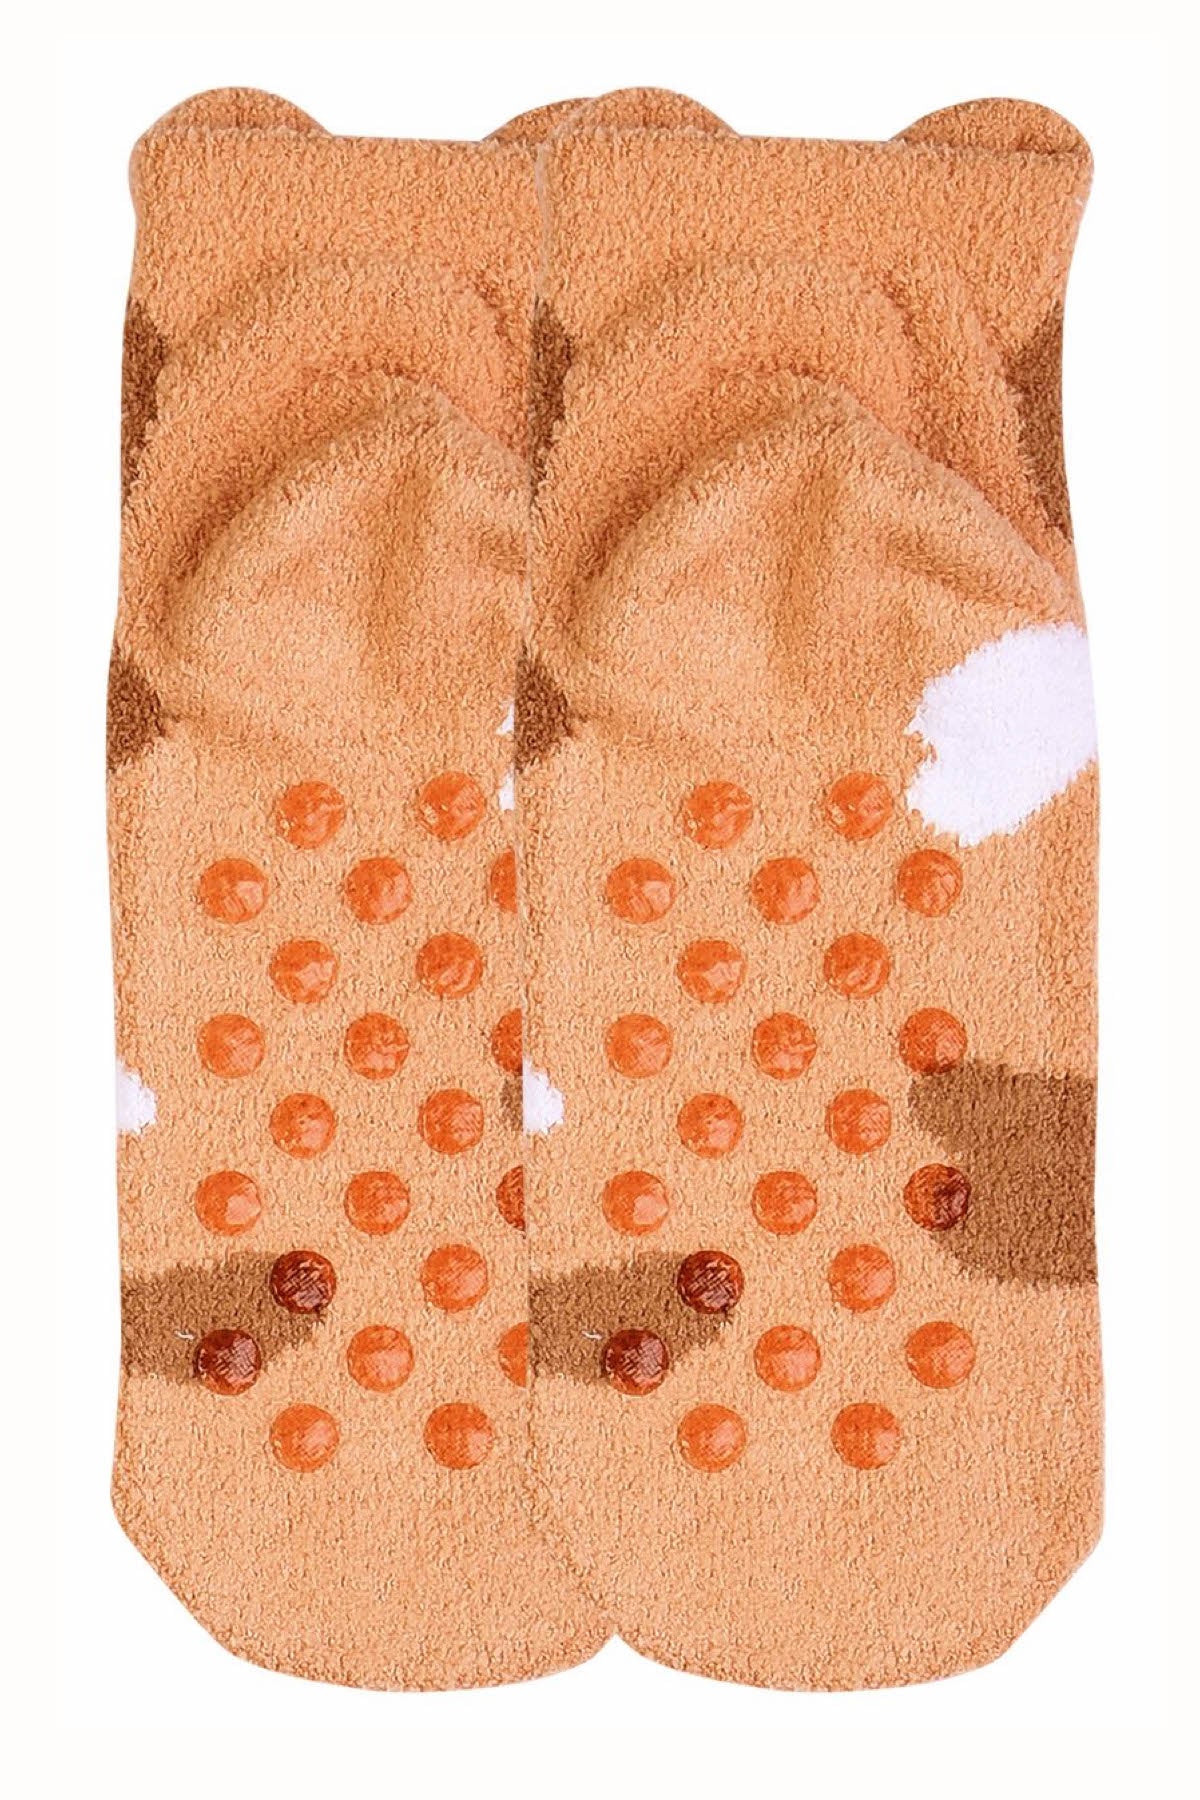 Sofra Apricot Kitty Cozy Picot Ankle Socks with Grippers